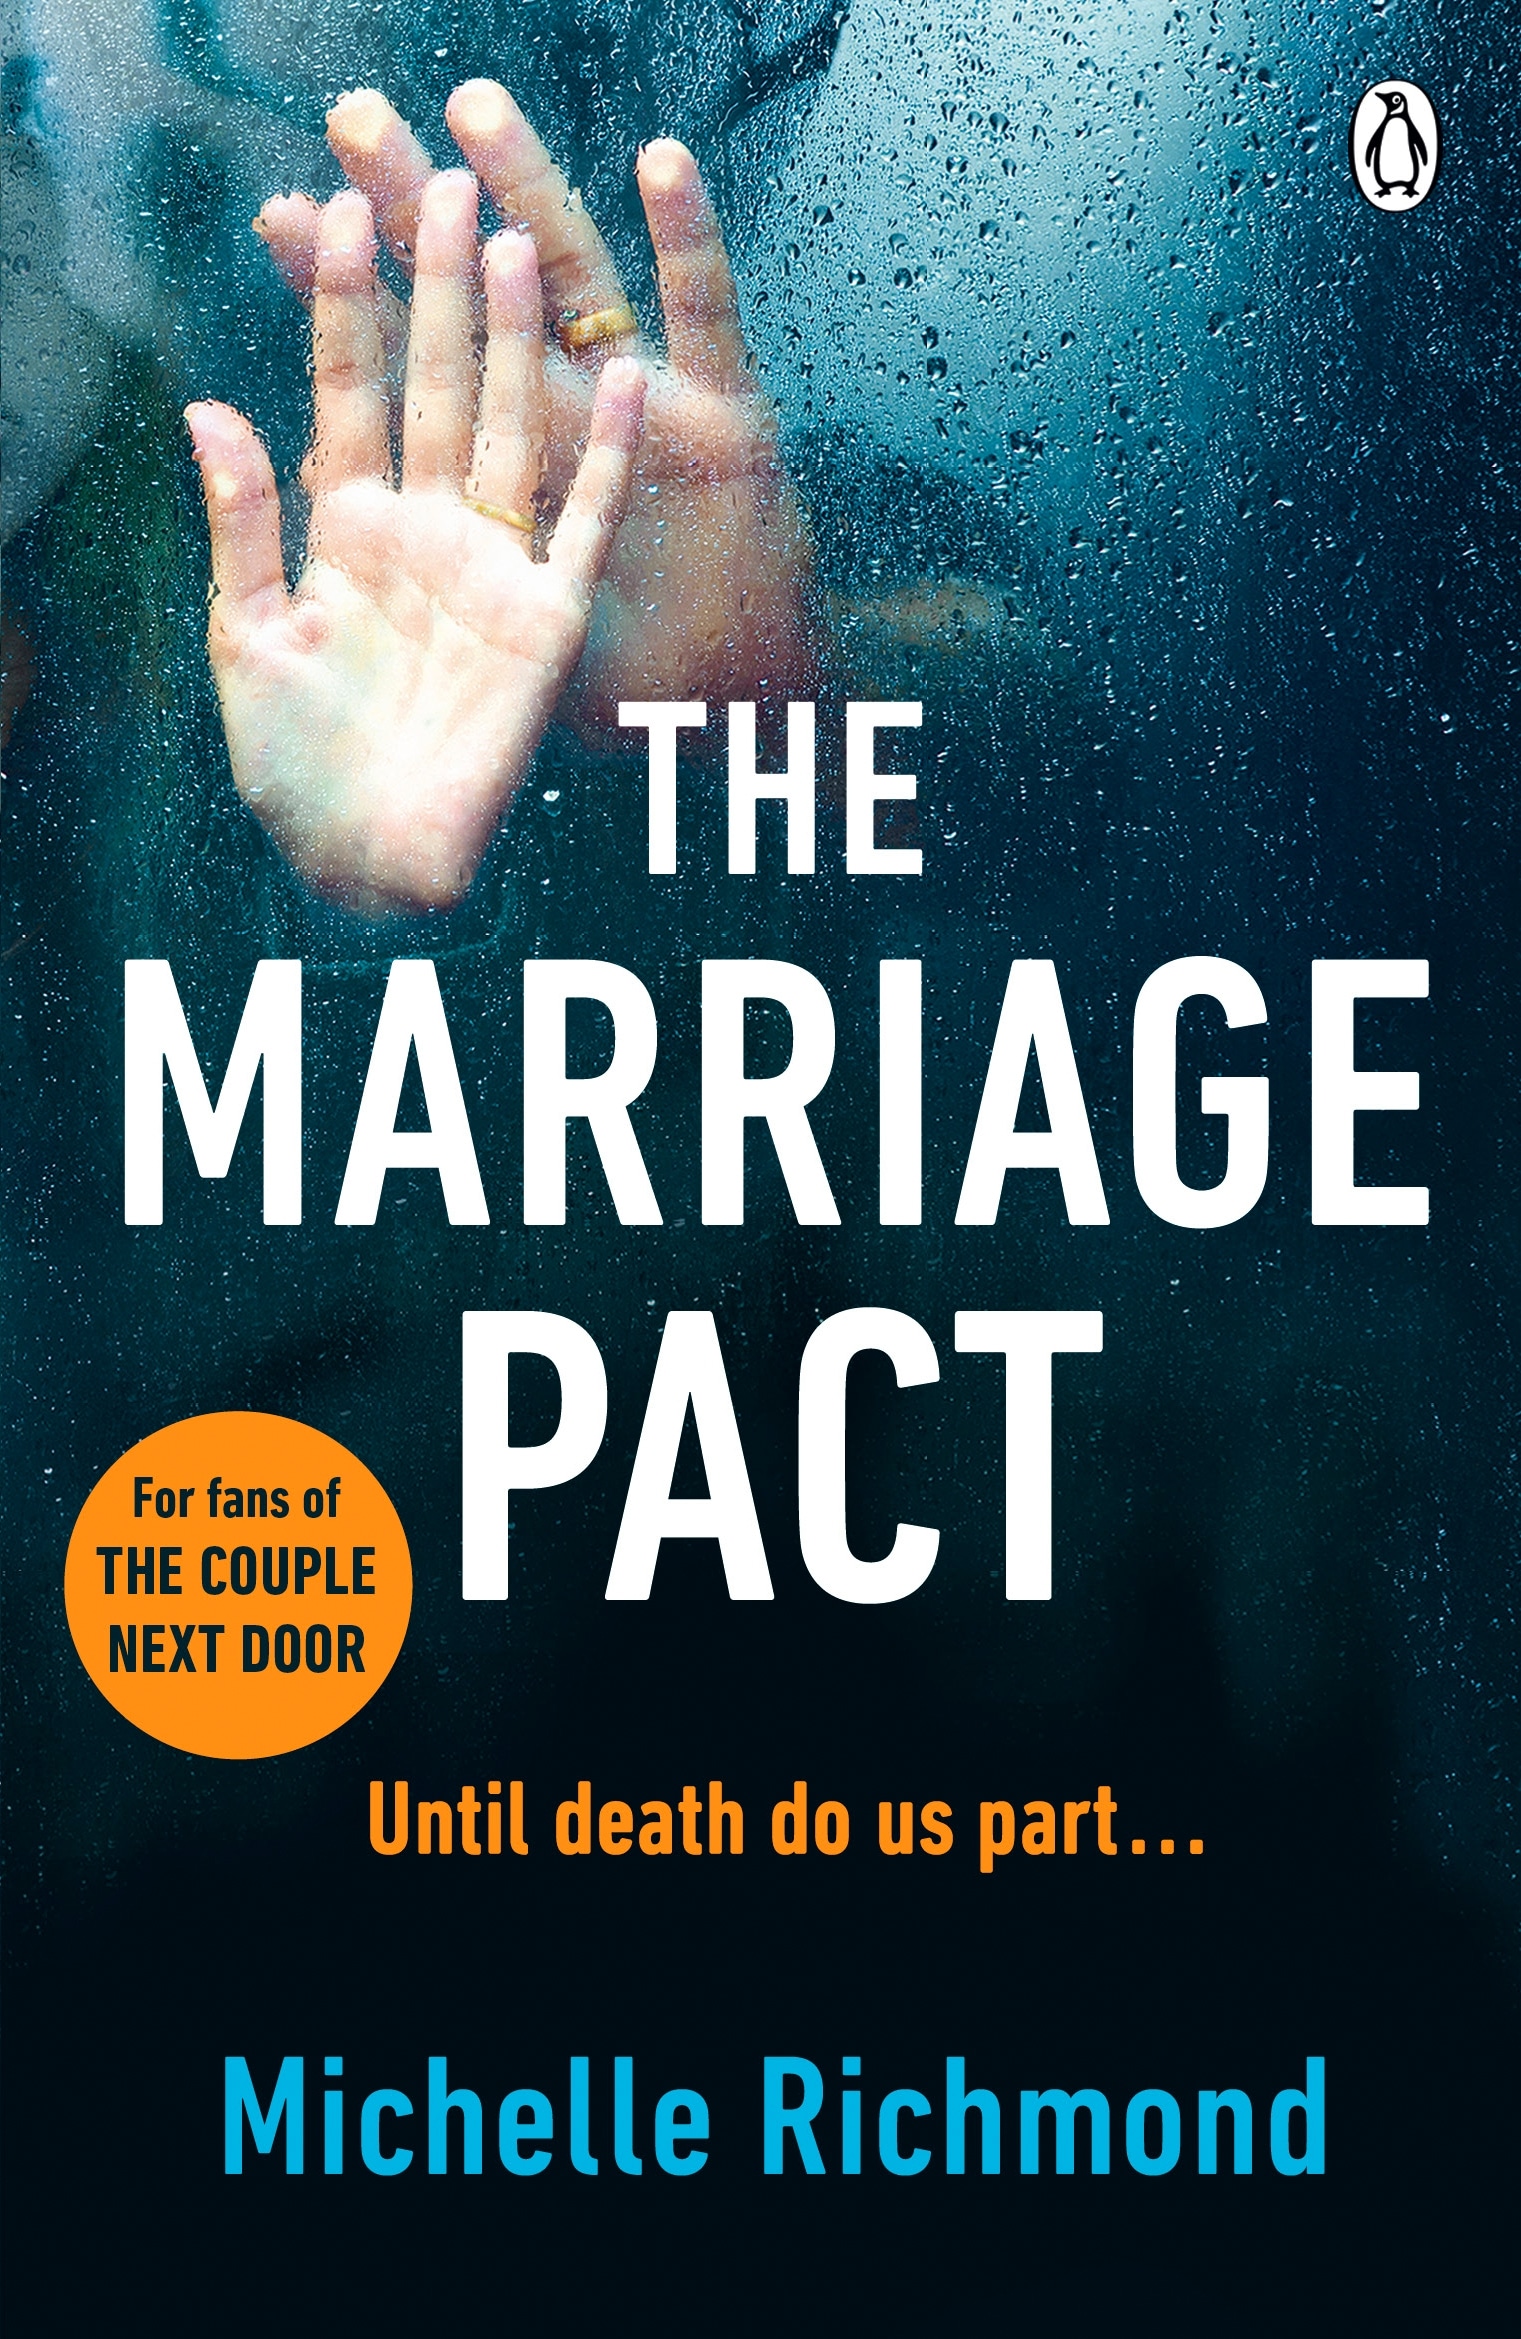 Book “The Marriage Pact” by Michelle Richmond — December 14, 2017